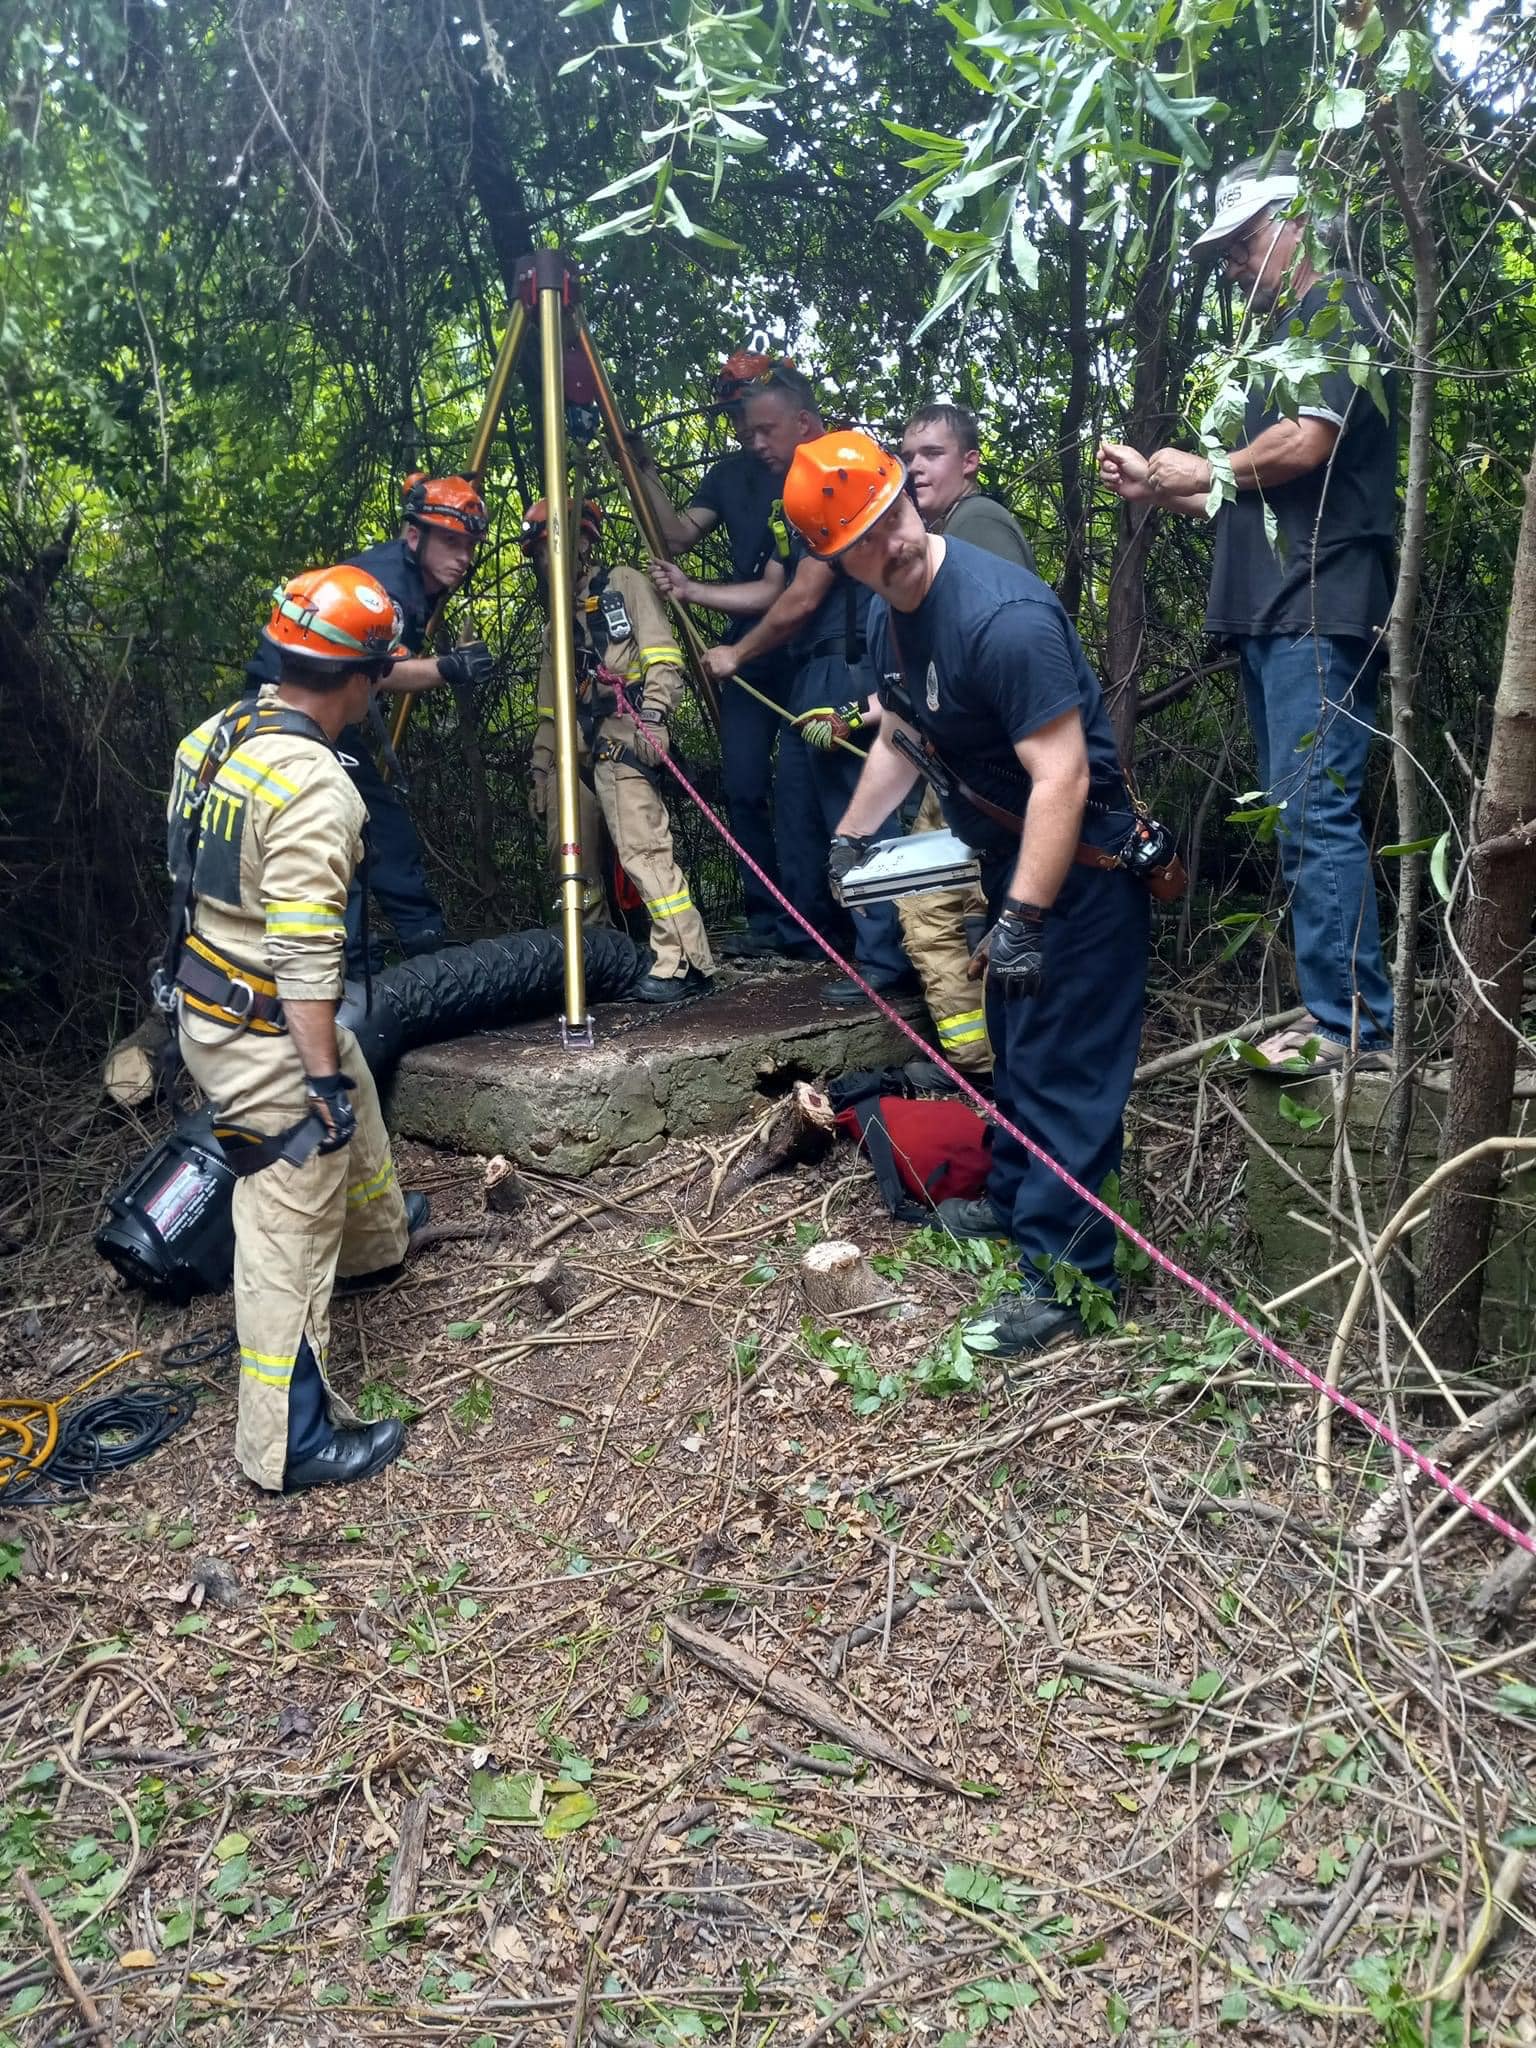 firefighters remove debris from well to rescue dog who fell down inside